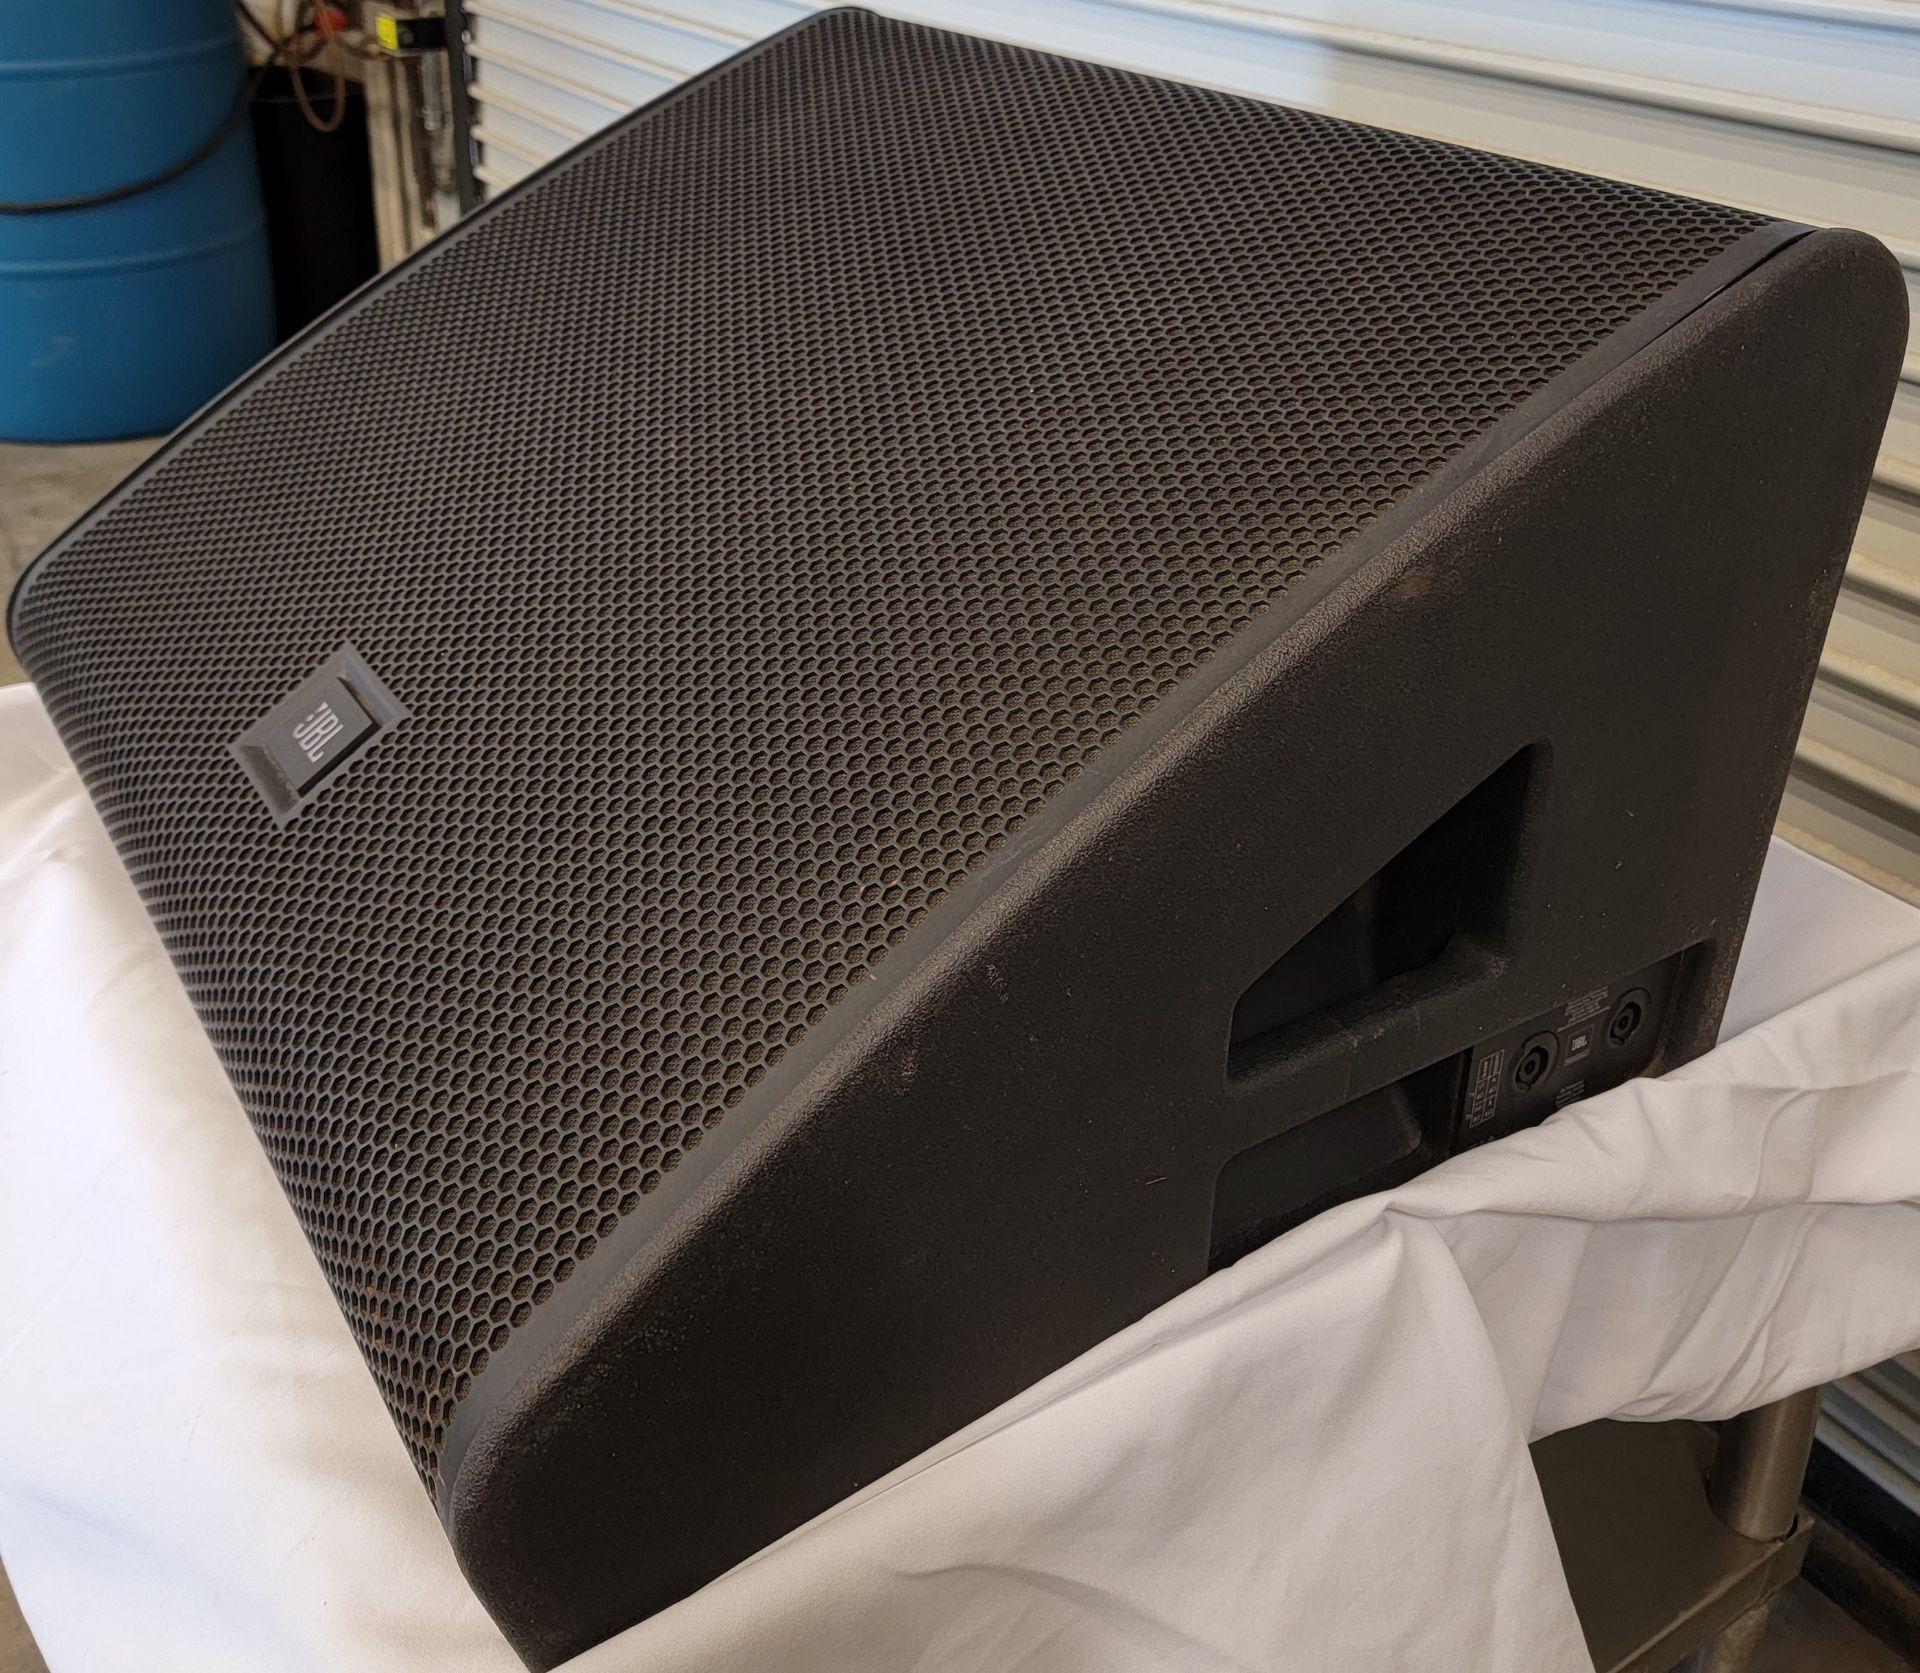 JBL premium stage monitoring products - Image 3 of 5